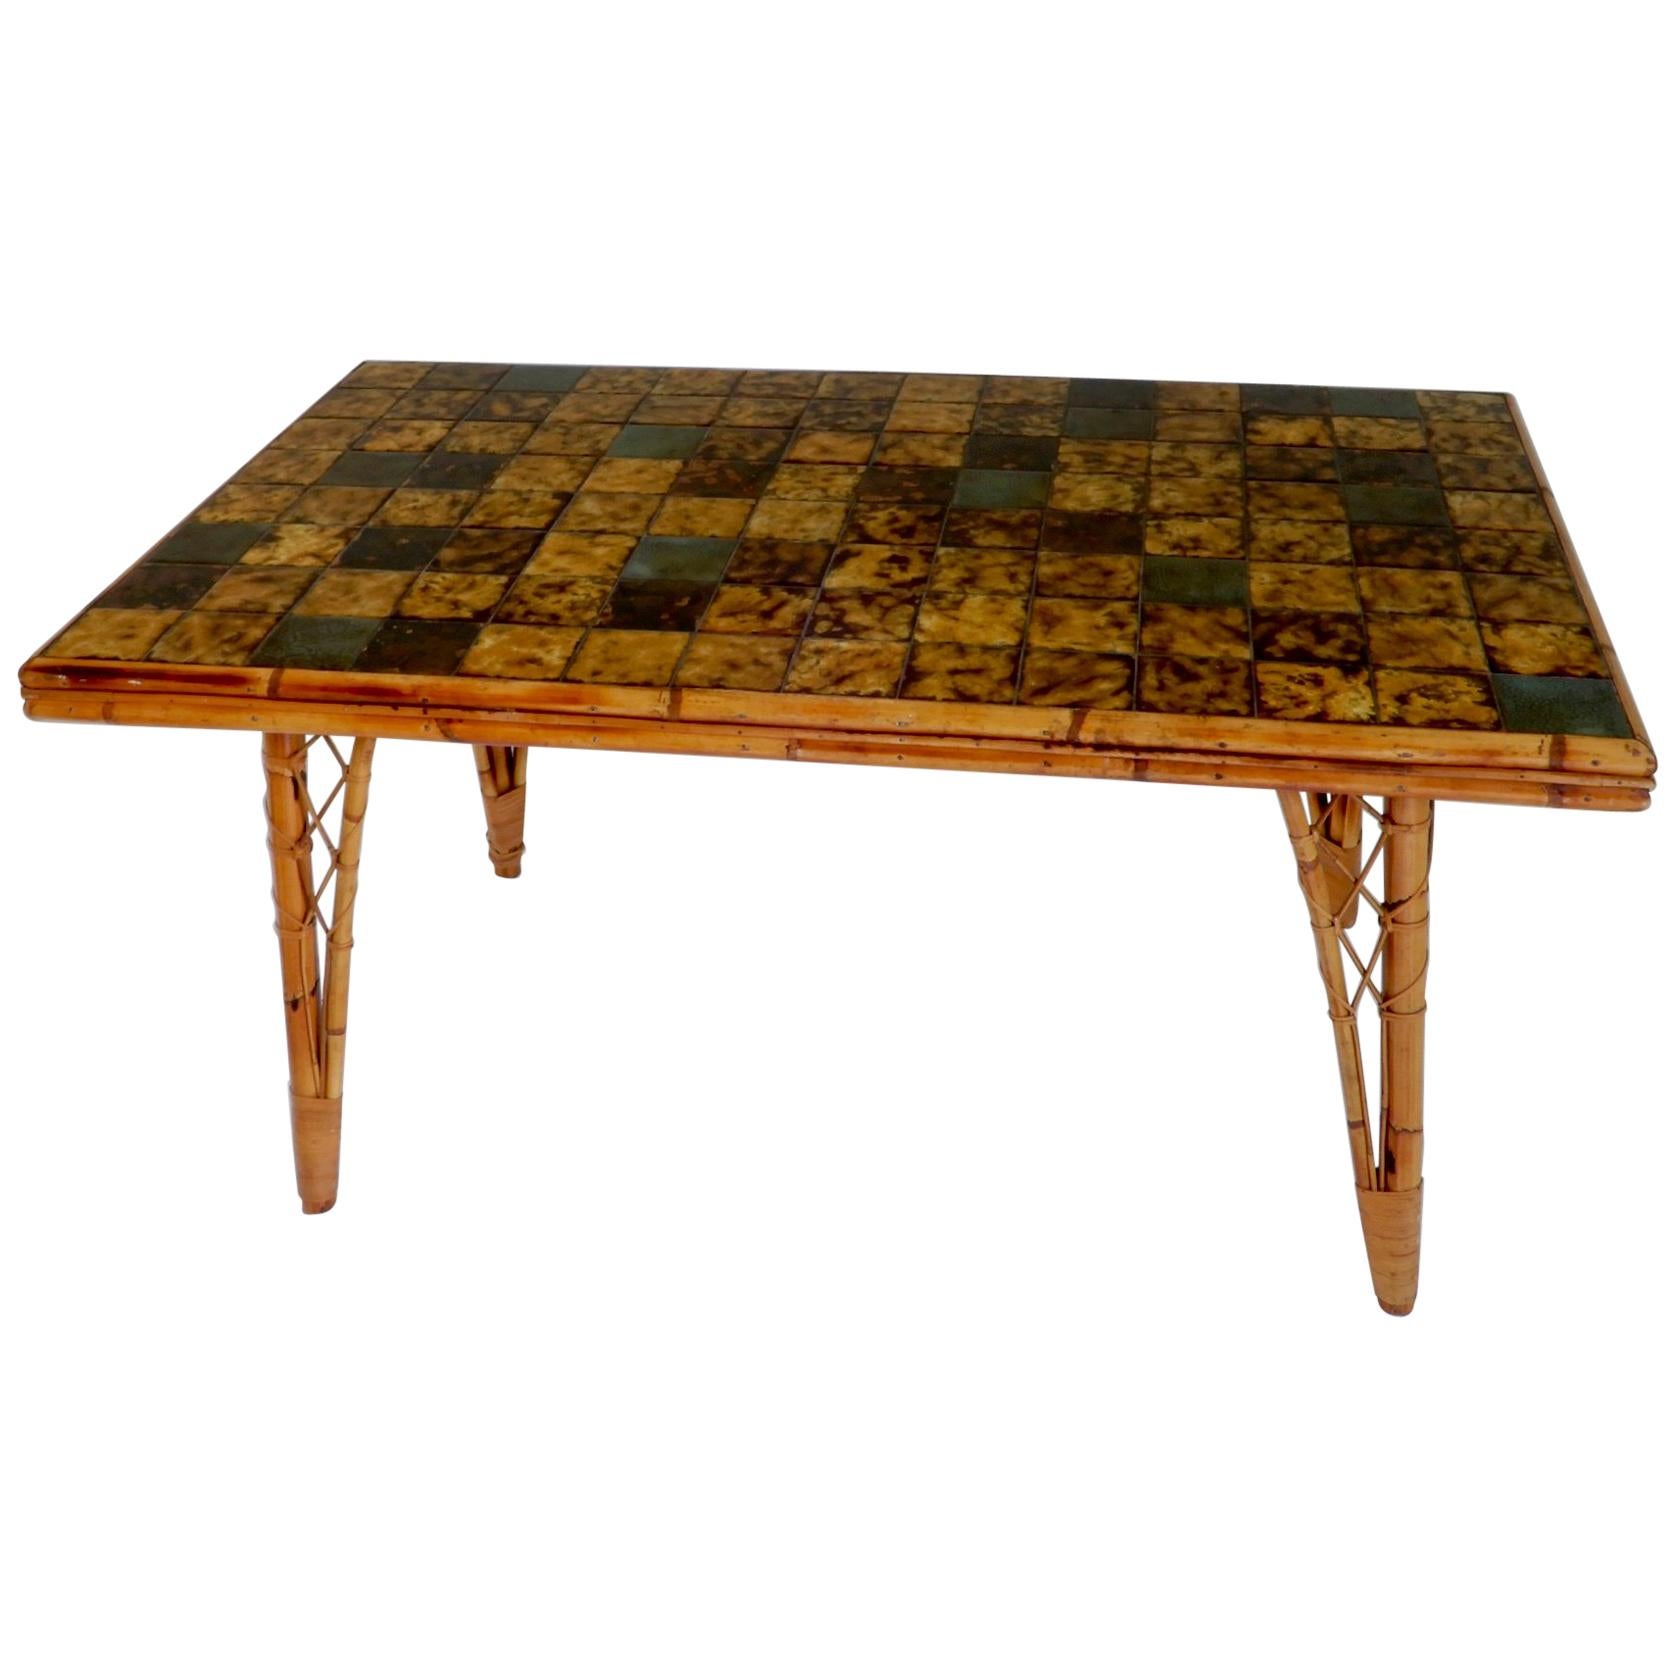 French Bamboo Dining Table with Ceramic Tile Top, 1950s